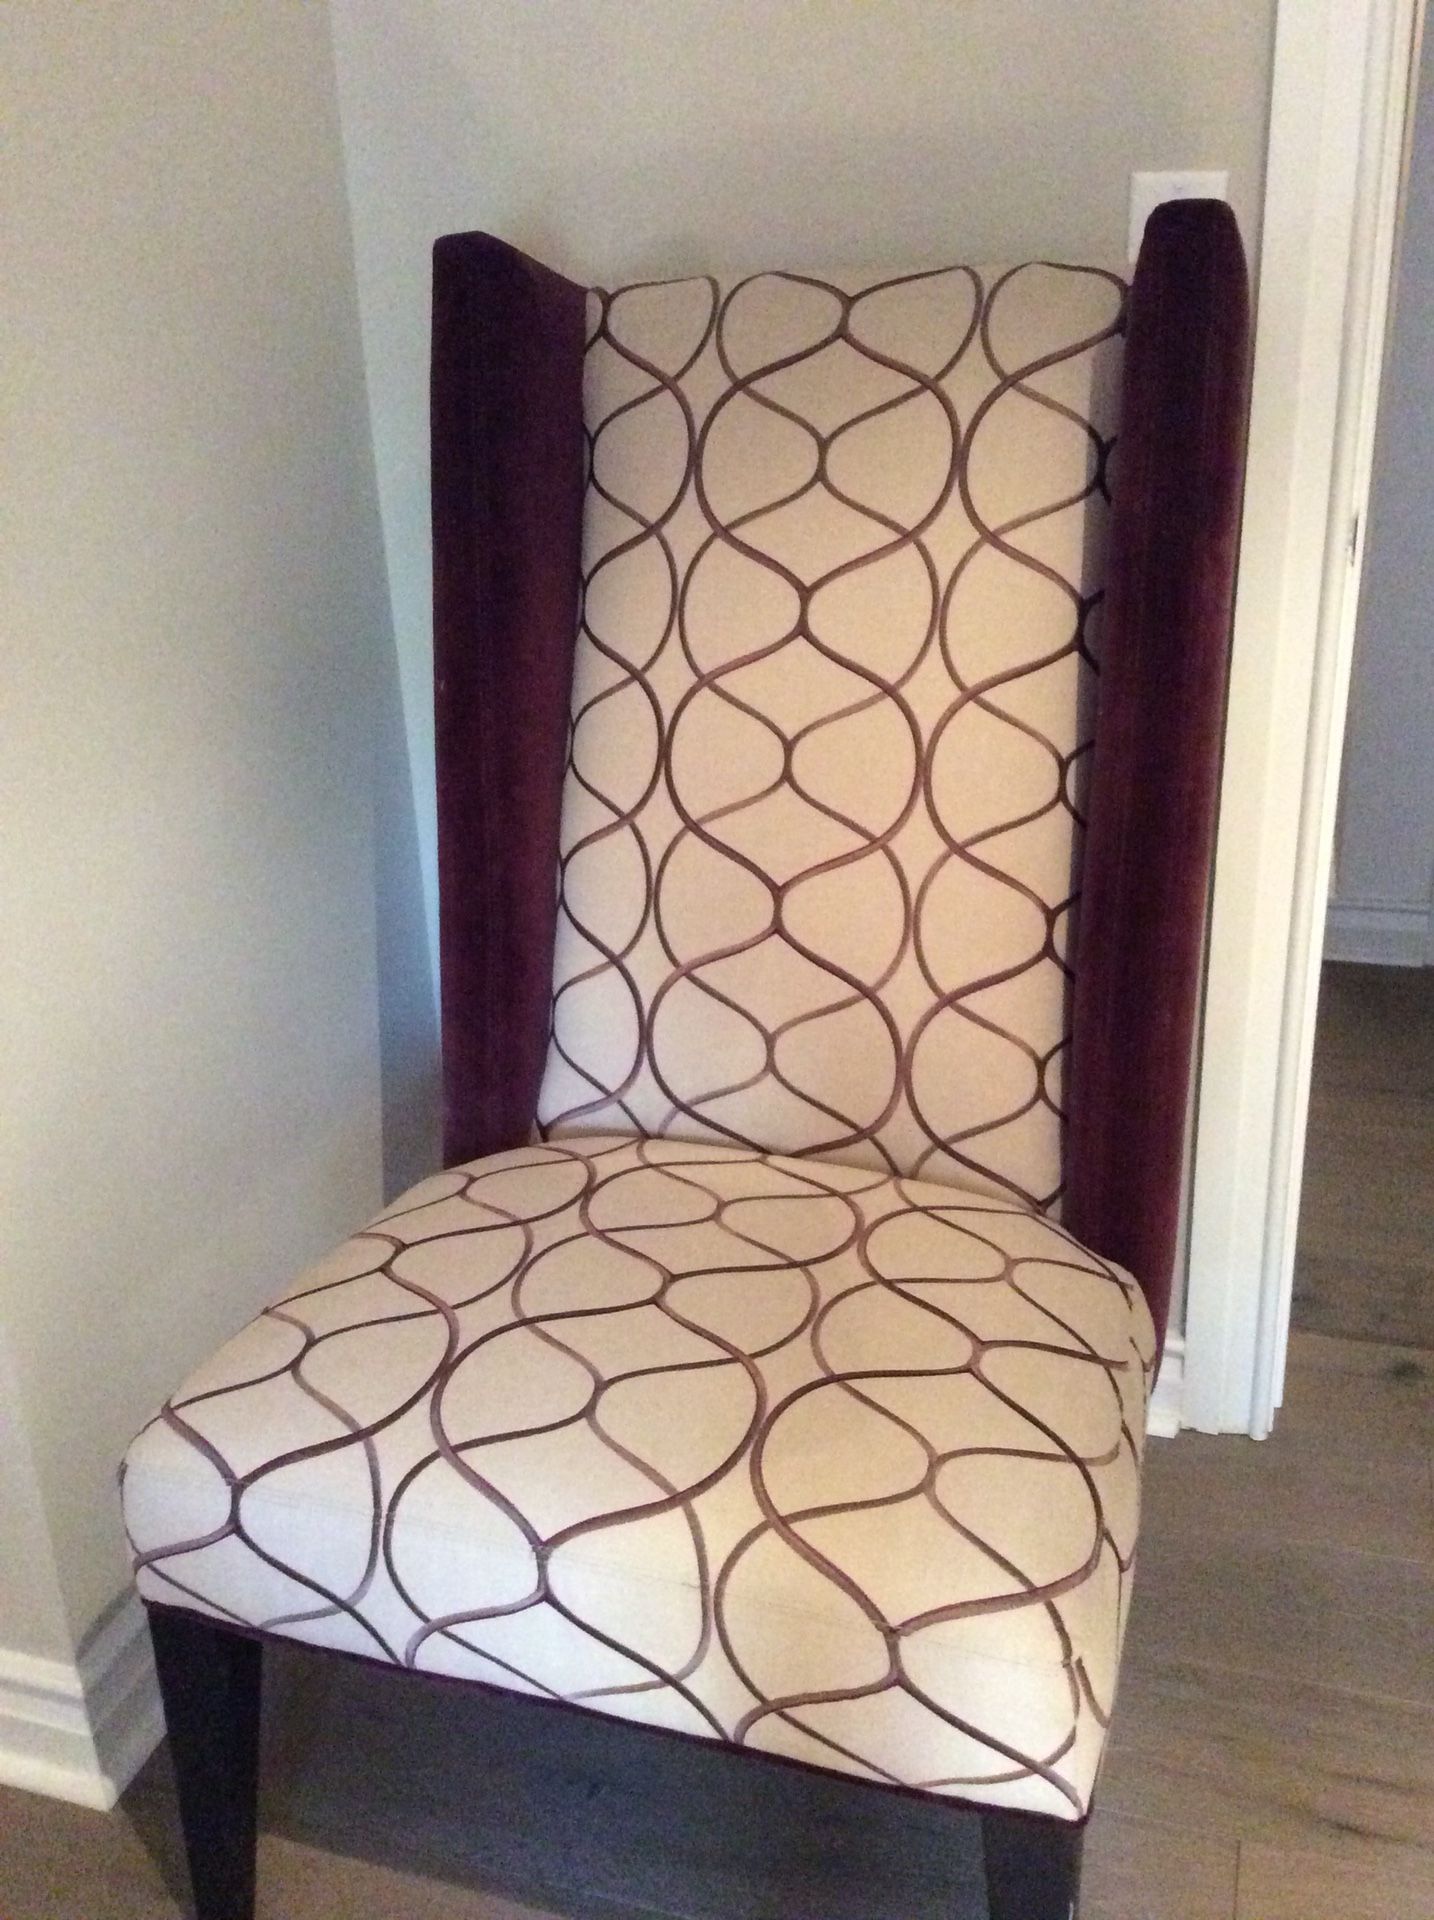 Exquisite upholstered chairs